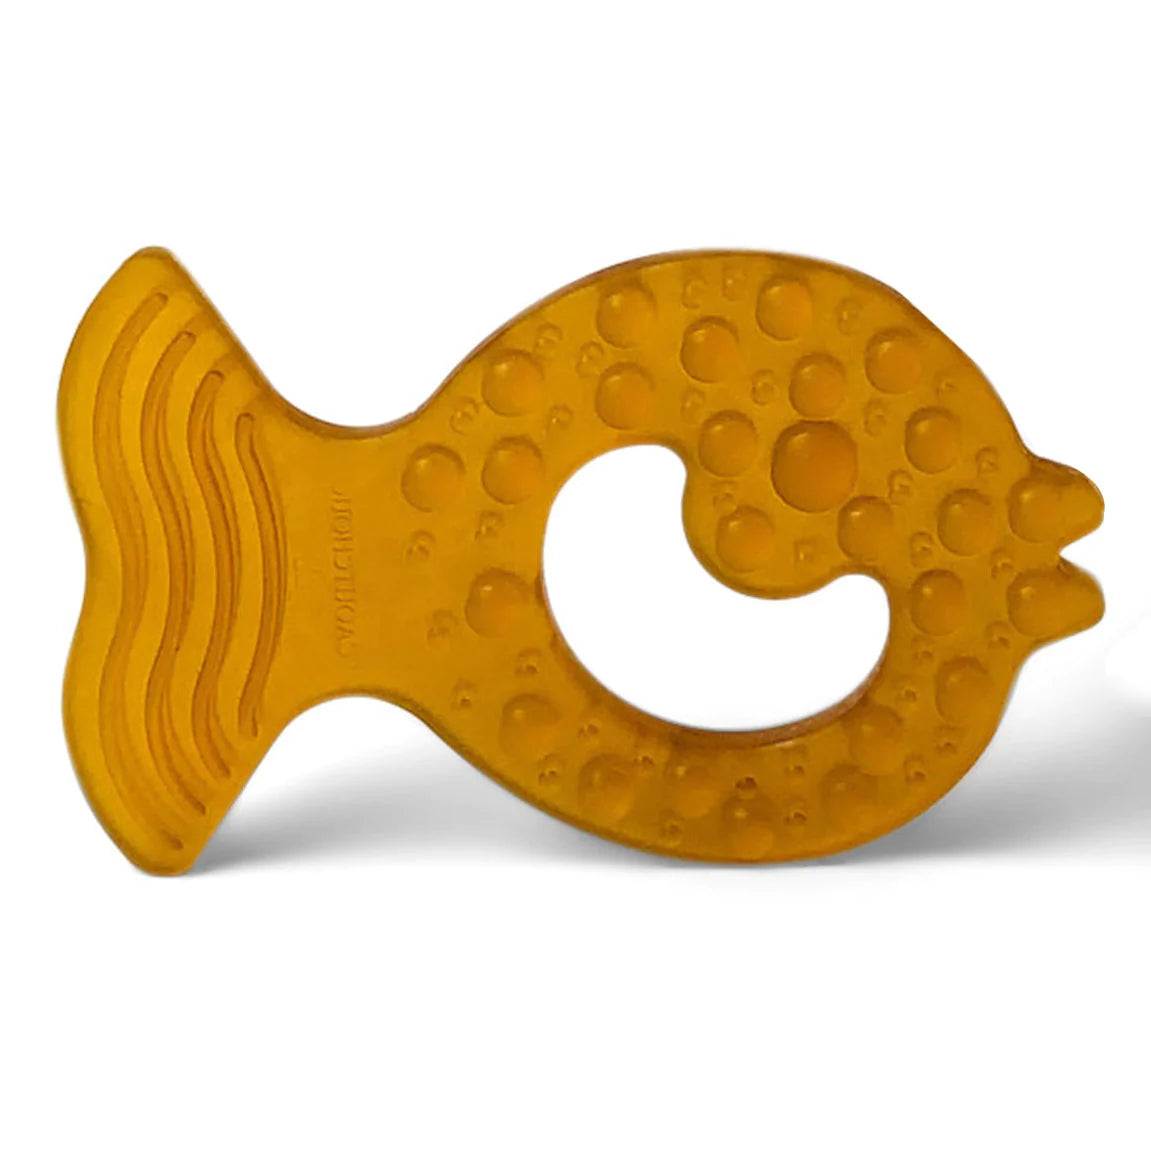 natural rubber soother, fish soother teether